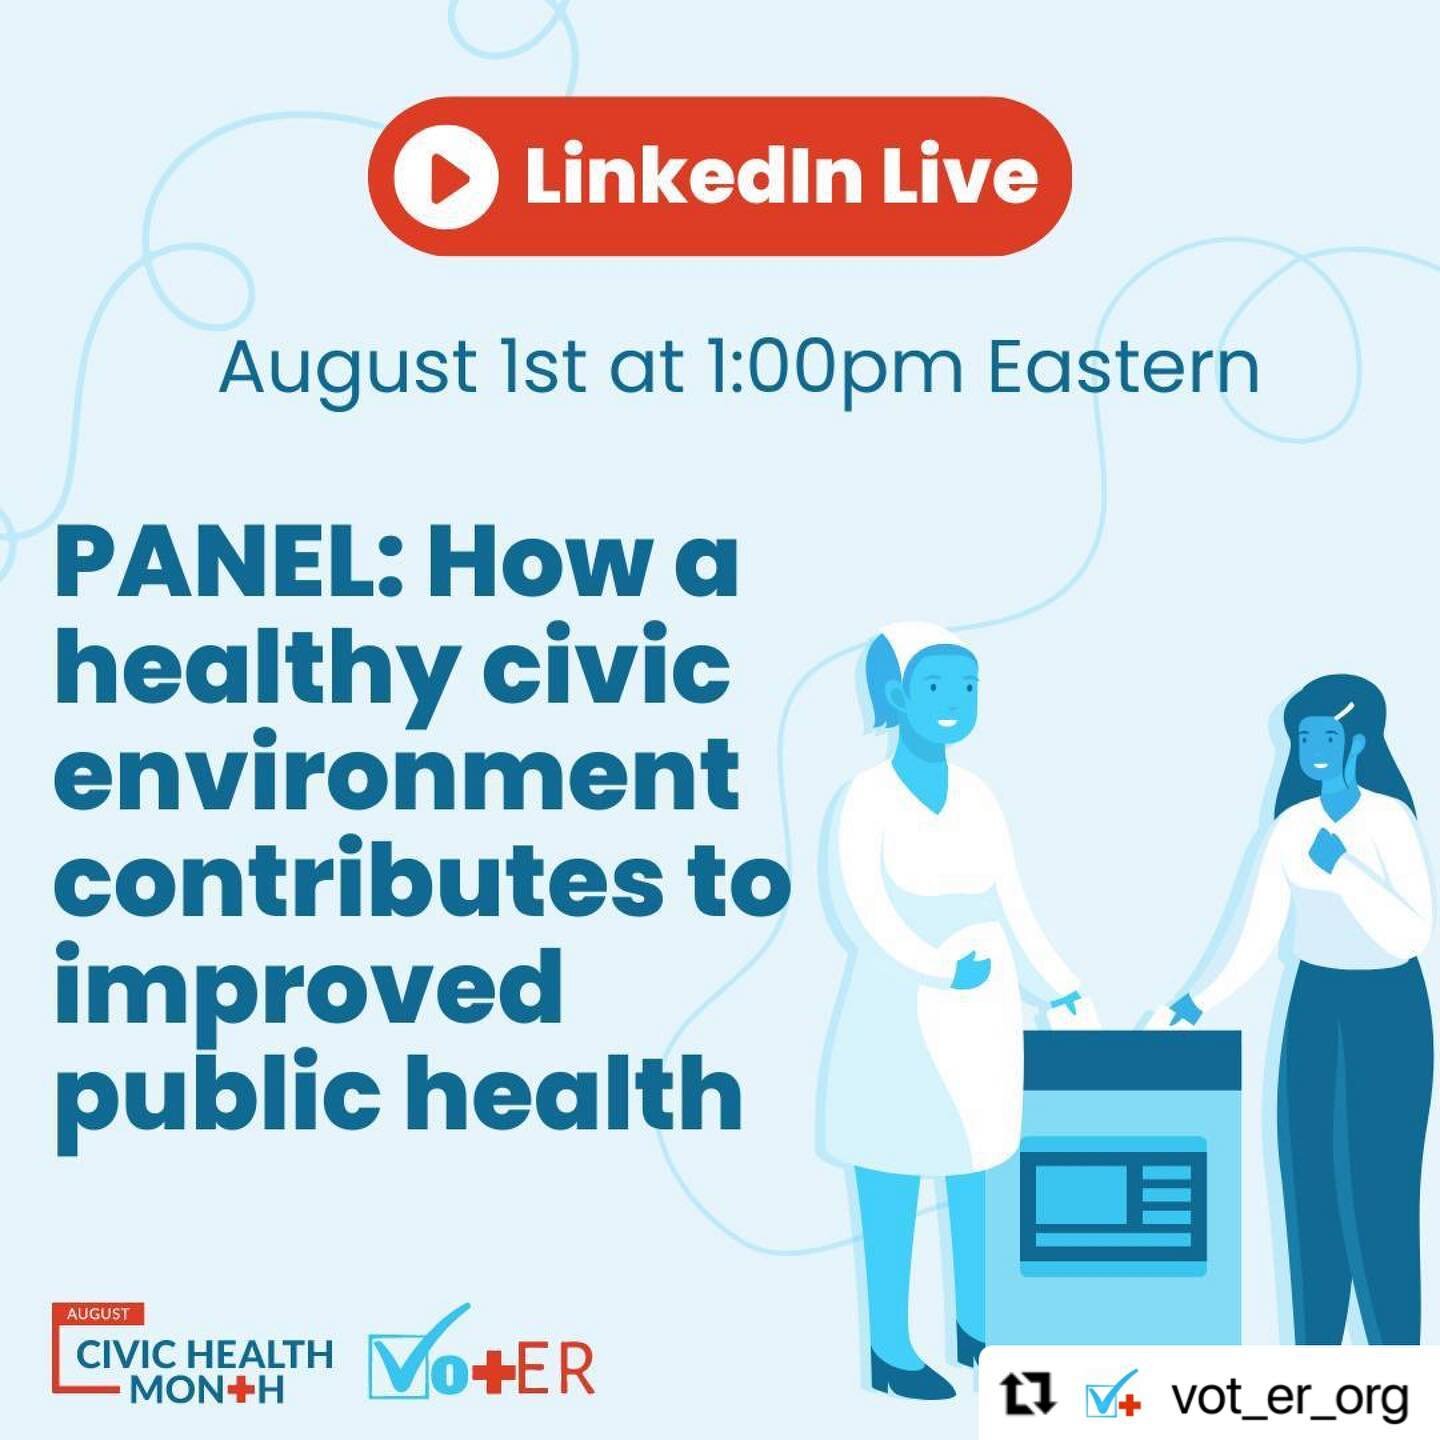 #Repost @vot_er_org with @use.repost
・・・
🚀 Ready for tomorrow's eye-opening discussion? 🤩 Join us on August 1st, 1pm Eastern, for a LinkedIn Live panel 🎥 with @vot_er_org, @altamedhealths, @myvotemyhealth, and @nahn_nursing that reveals the link b